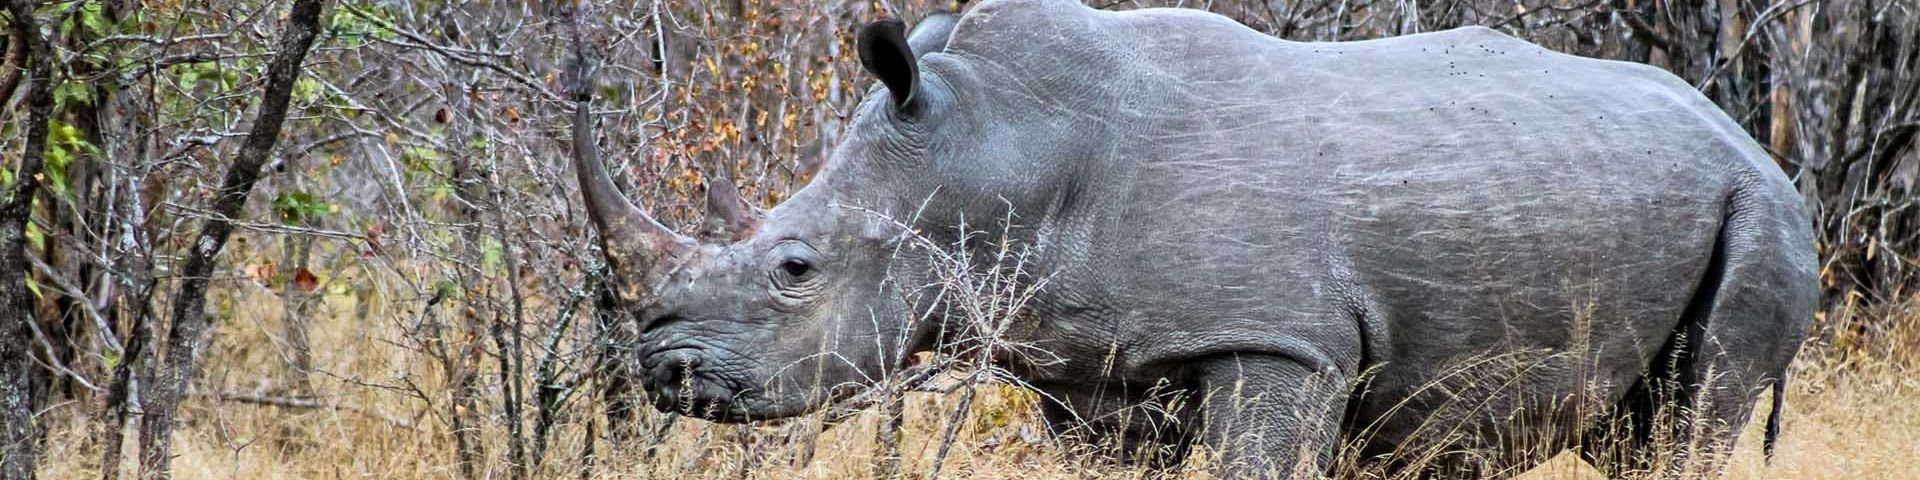 A rhino in the wild at Kruger National Park, South Africa (© Venessa Mathebula, age 15)